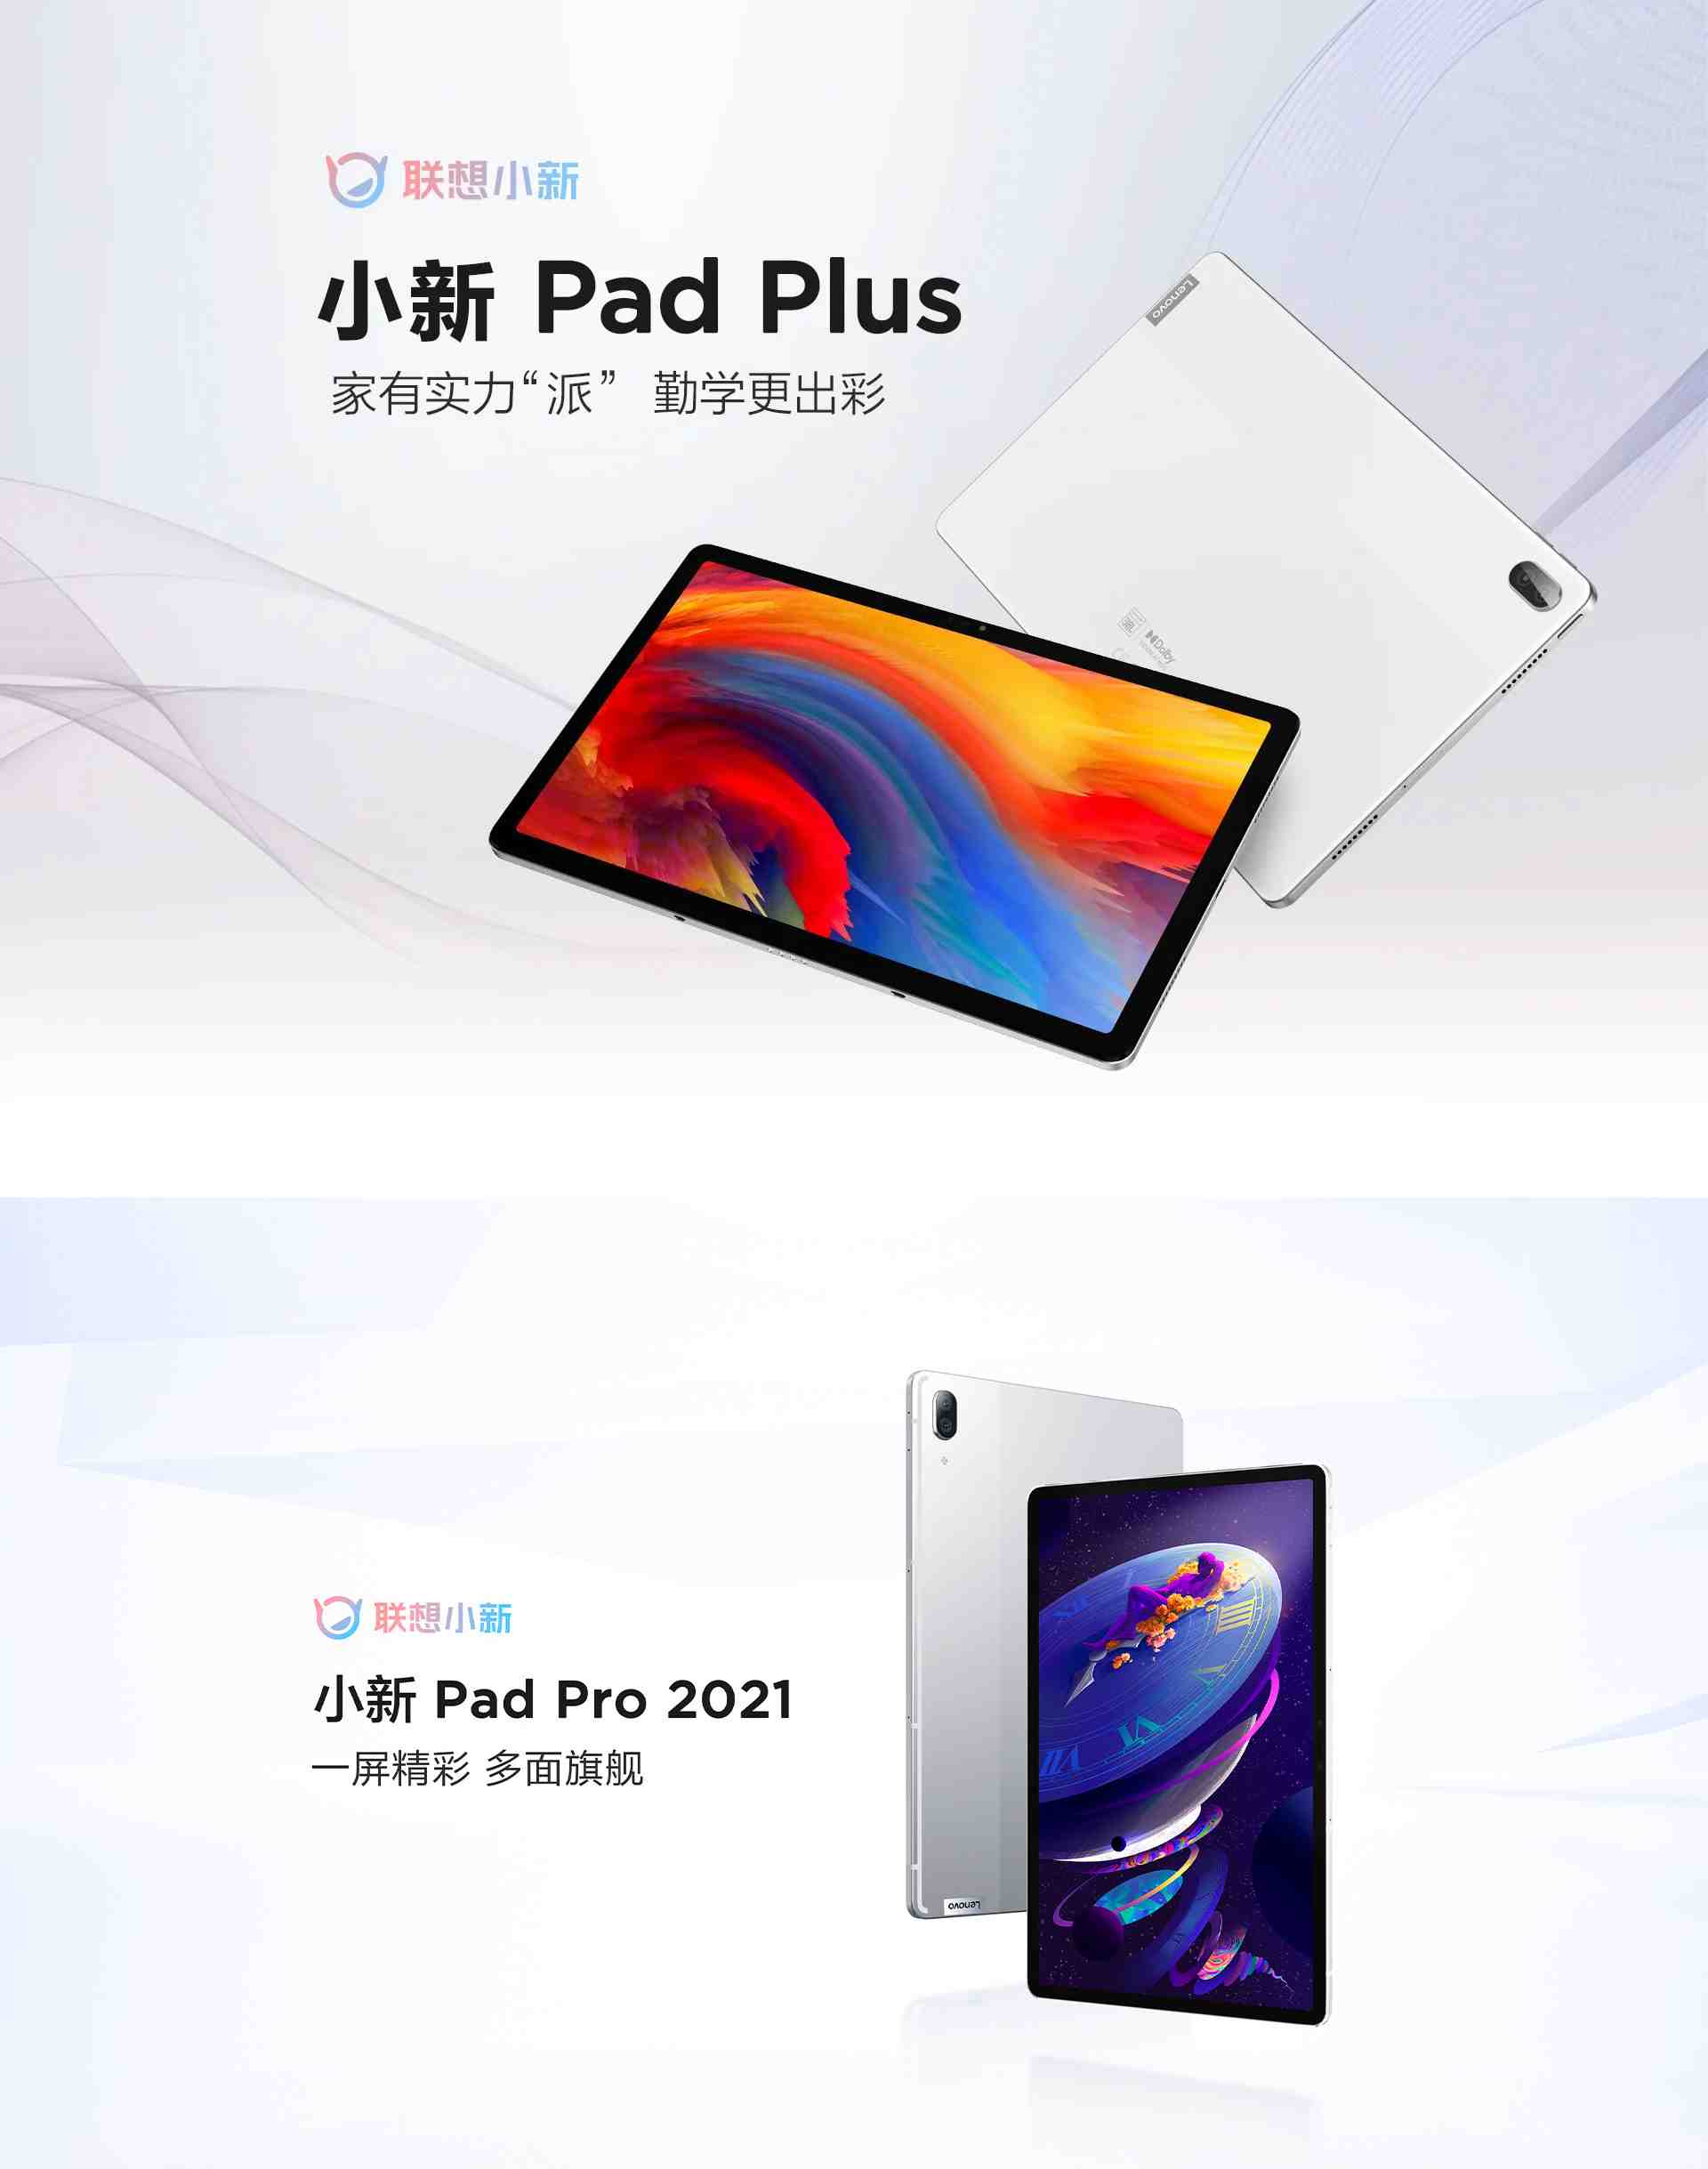 Lenovo Xiaoxin Pad Pro 2021 / Xiaoxin Pad Plus launched: Specs